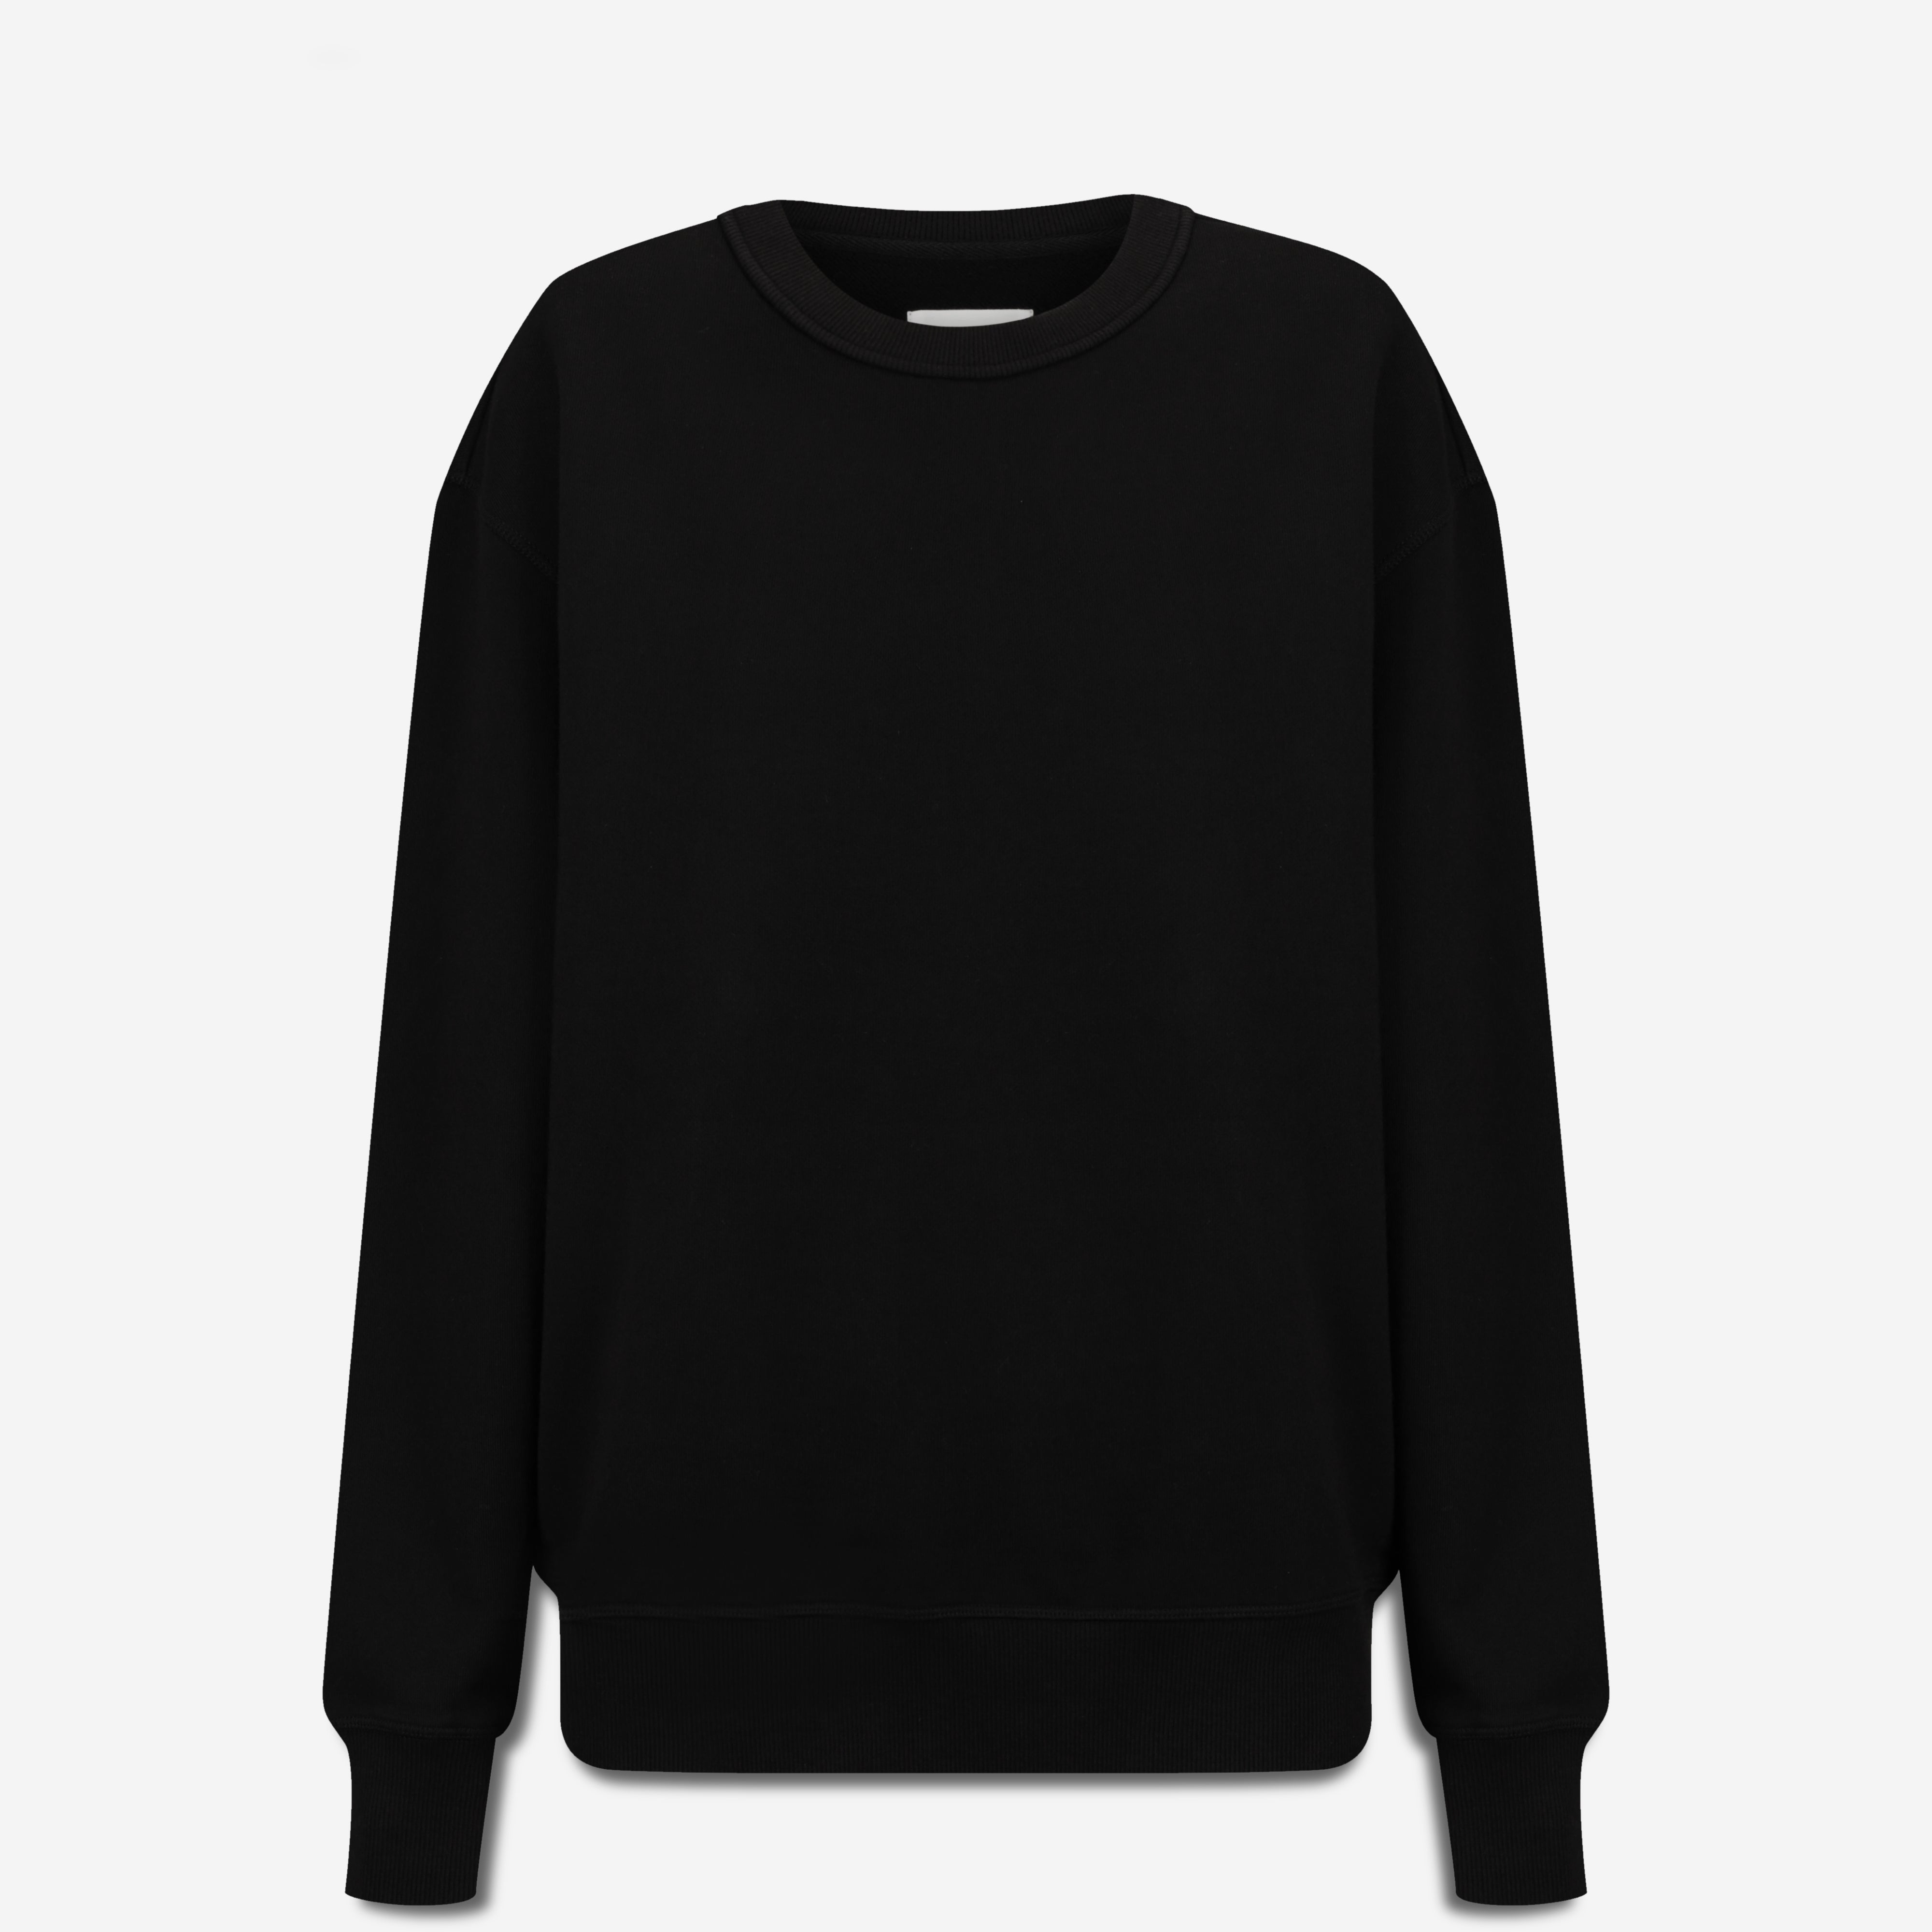 Could Be Nice - Women's Classic Crew / Soft Black